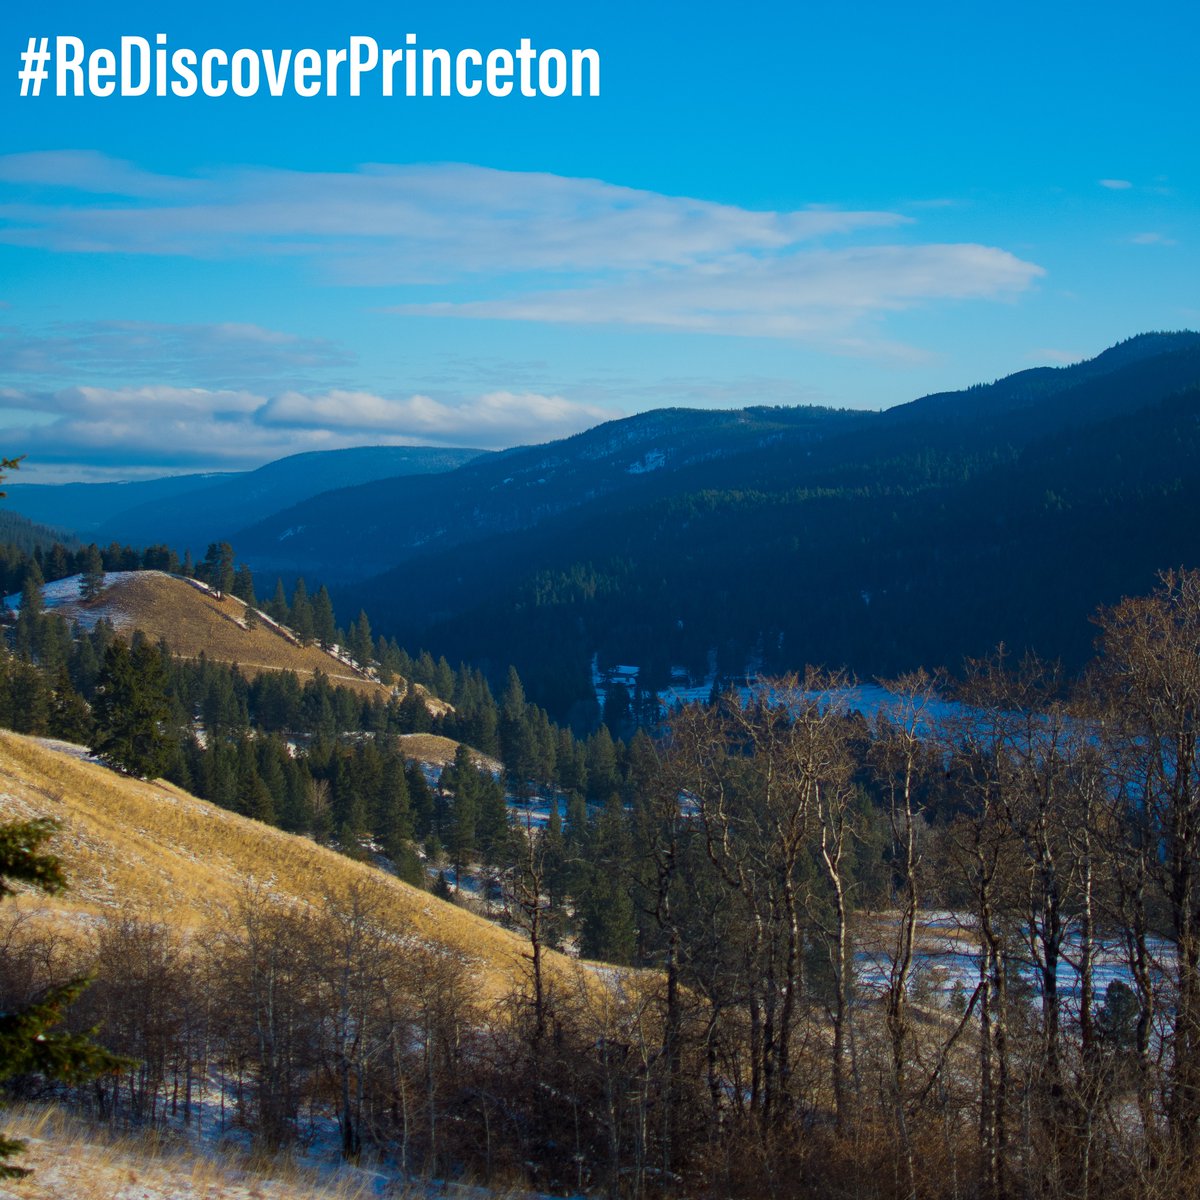 ✨🌷Spring is the perfect time to hit the trails! Take the family for a hike on the KVR or China Ridge Trail and enjoy the fresh air, spring blooms, and breathtaking scenery 🌸🛤🚶‍♀️ #rediscoverprinceton #princetonbc #townofprinceton #spring #britishcolumbia #explorebc #canada #🇨🇦